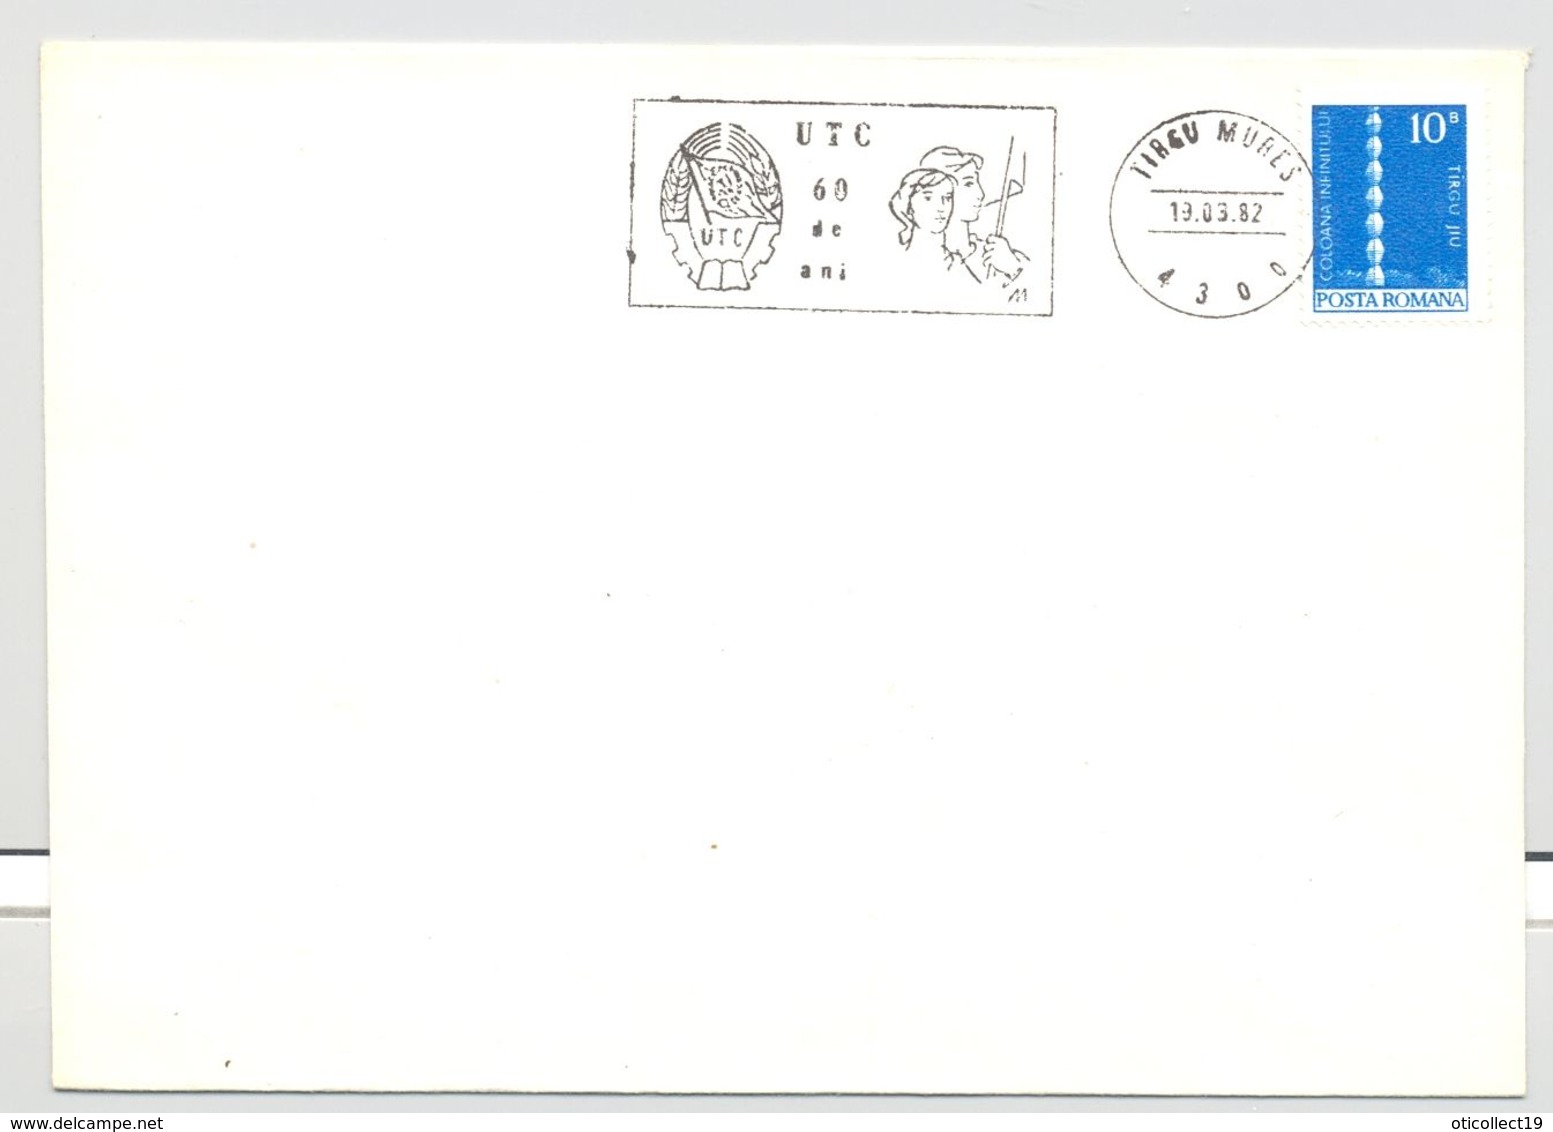 ROMANIAN YOUTH COMMUNIST ORGANIZATION ANNIVERSARY, SPECIAL POSTMARK ON COVER, ENDLESS COLUMN STAMP, 1982, ROMANIA - Lettres & Documents